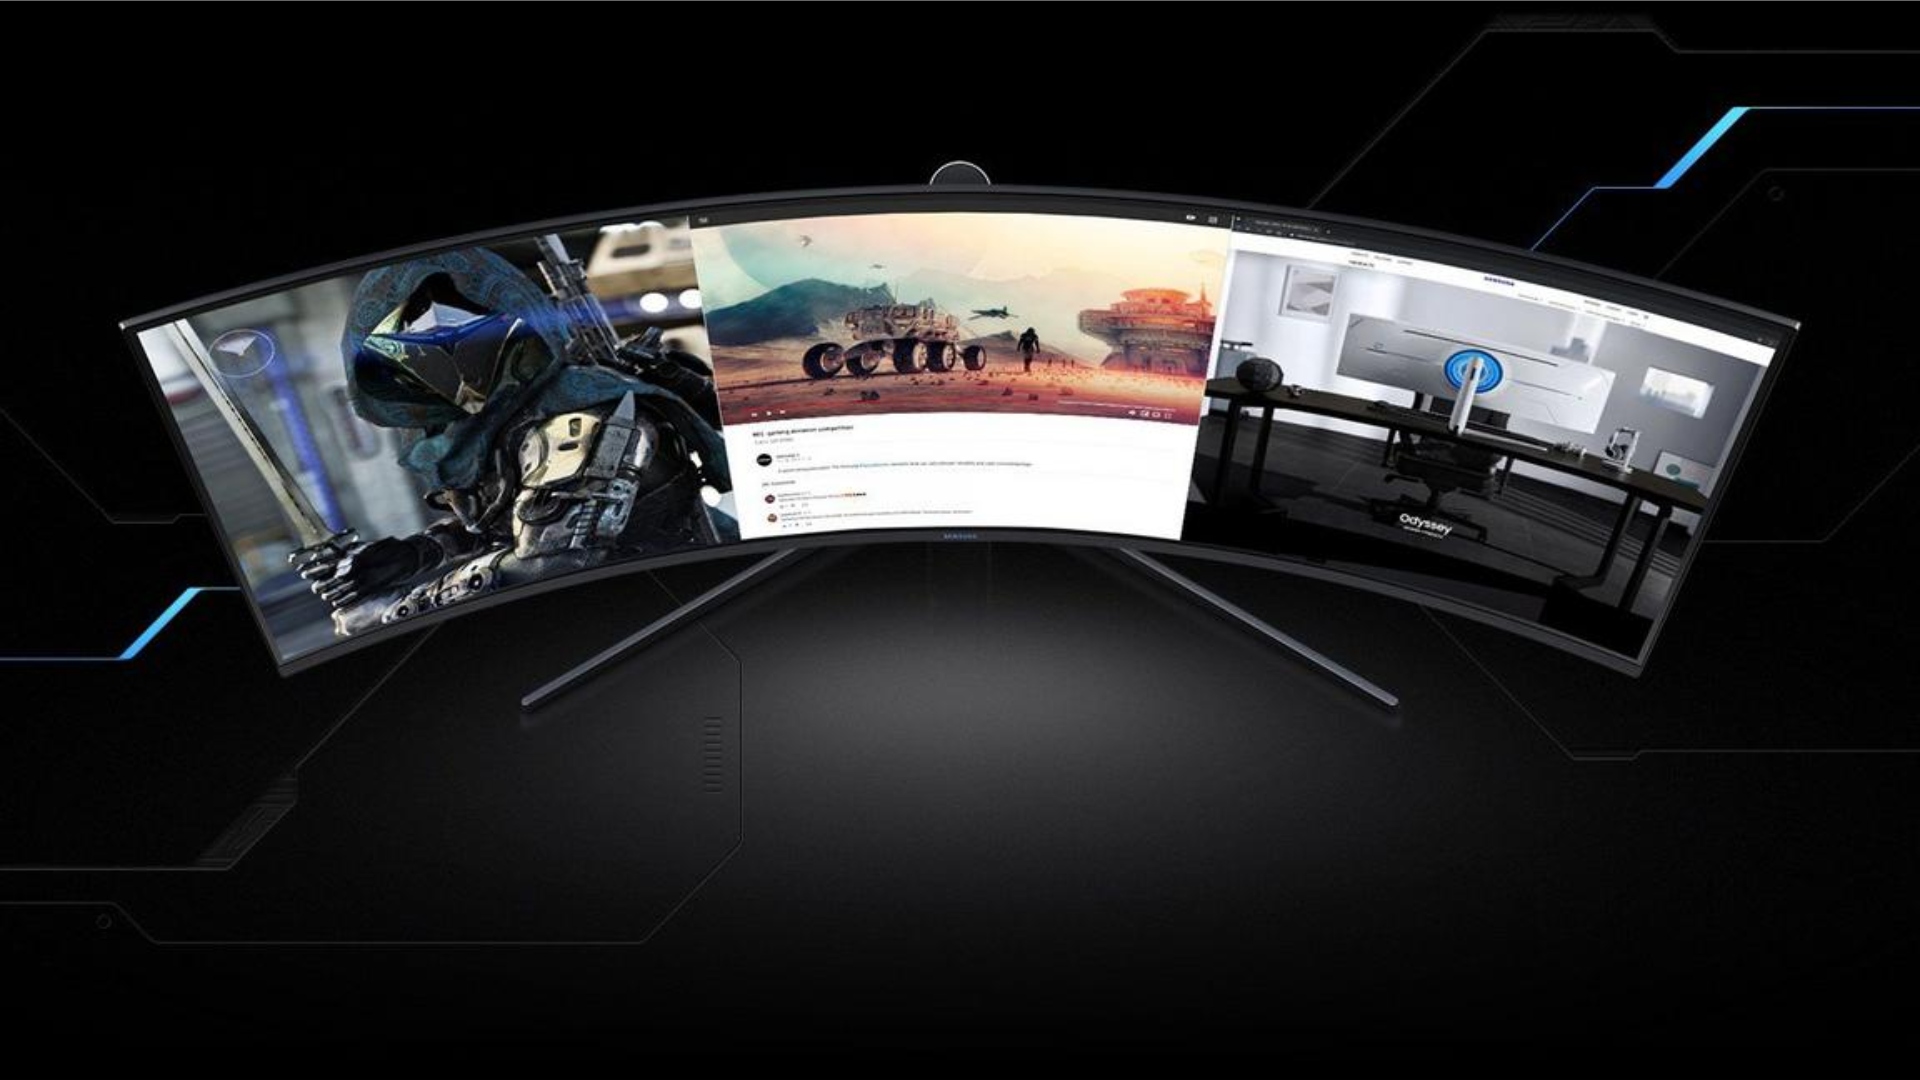 This curved Samsung gaming monitor is $400 cheaper